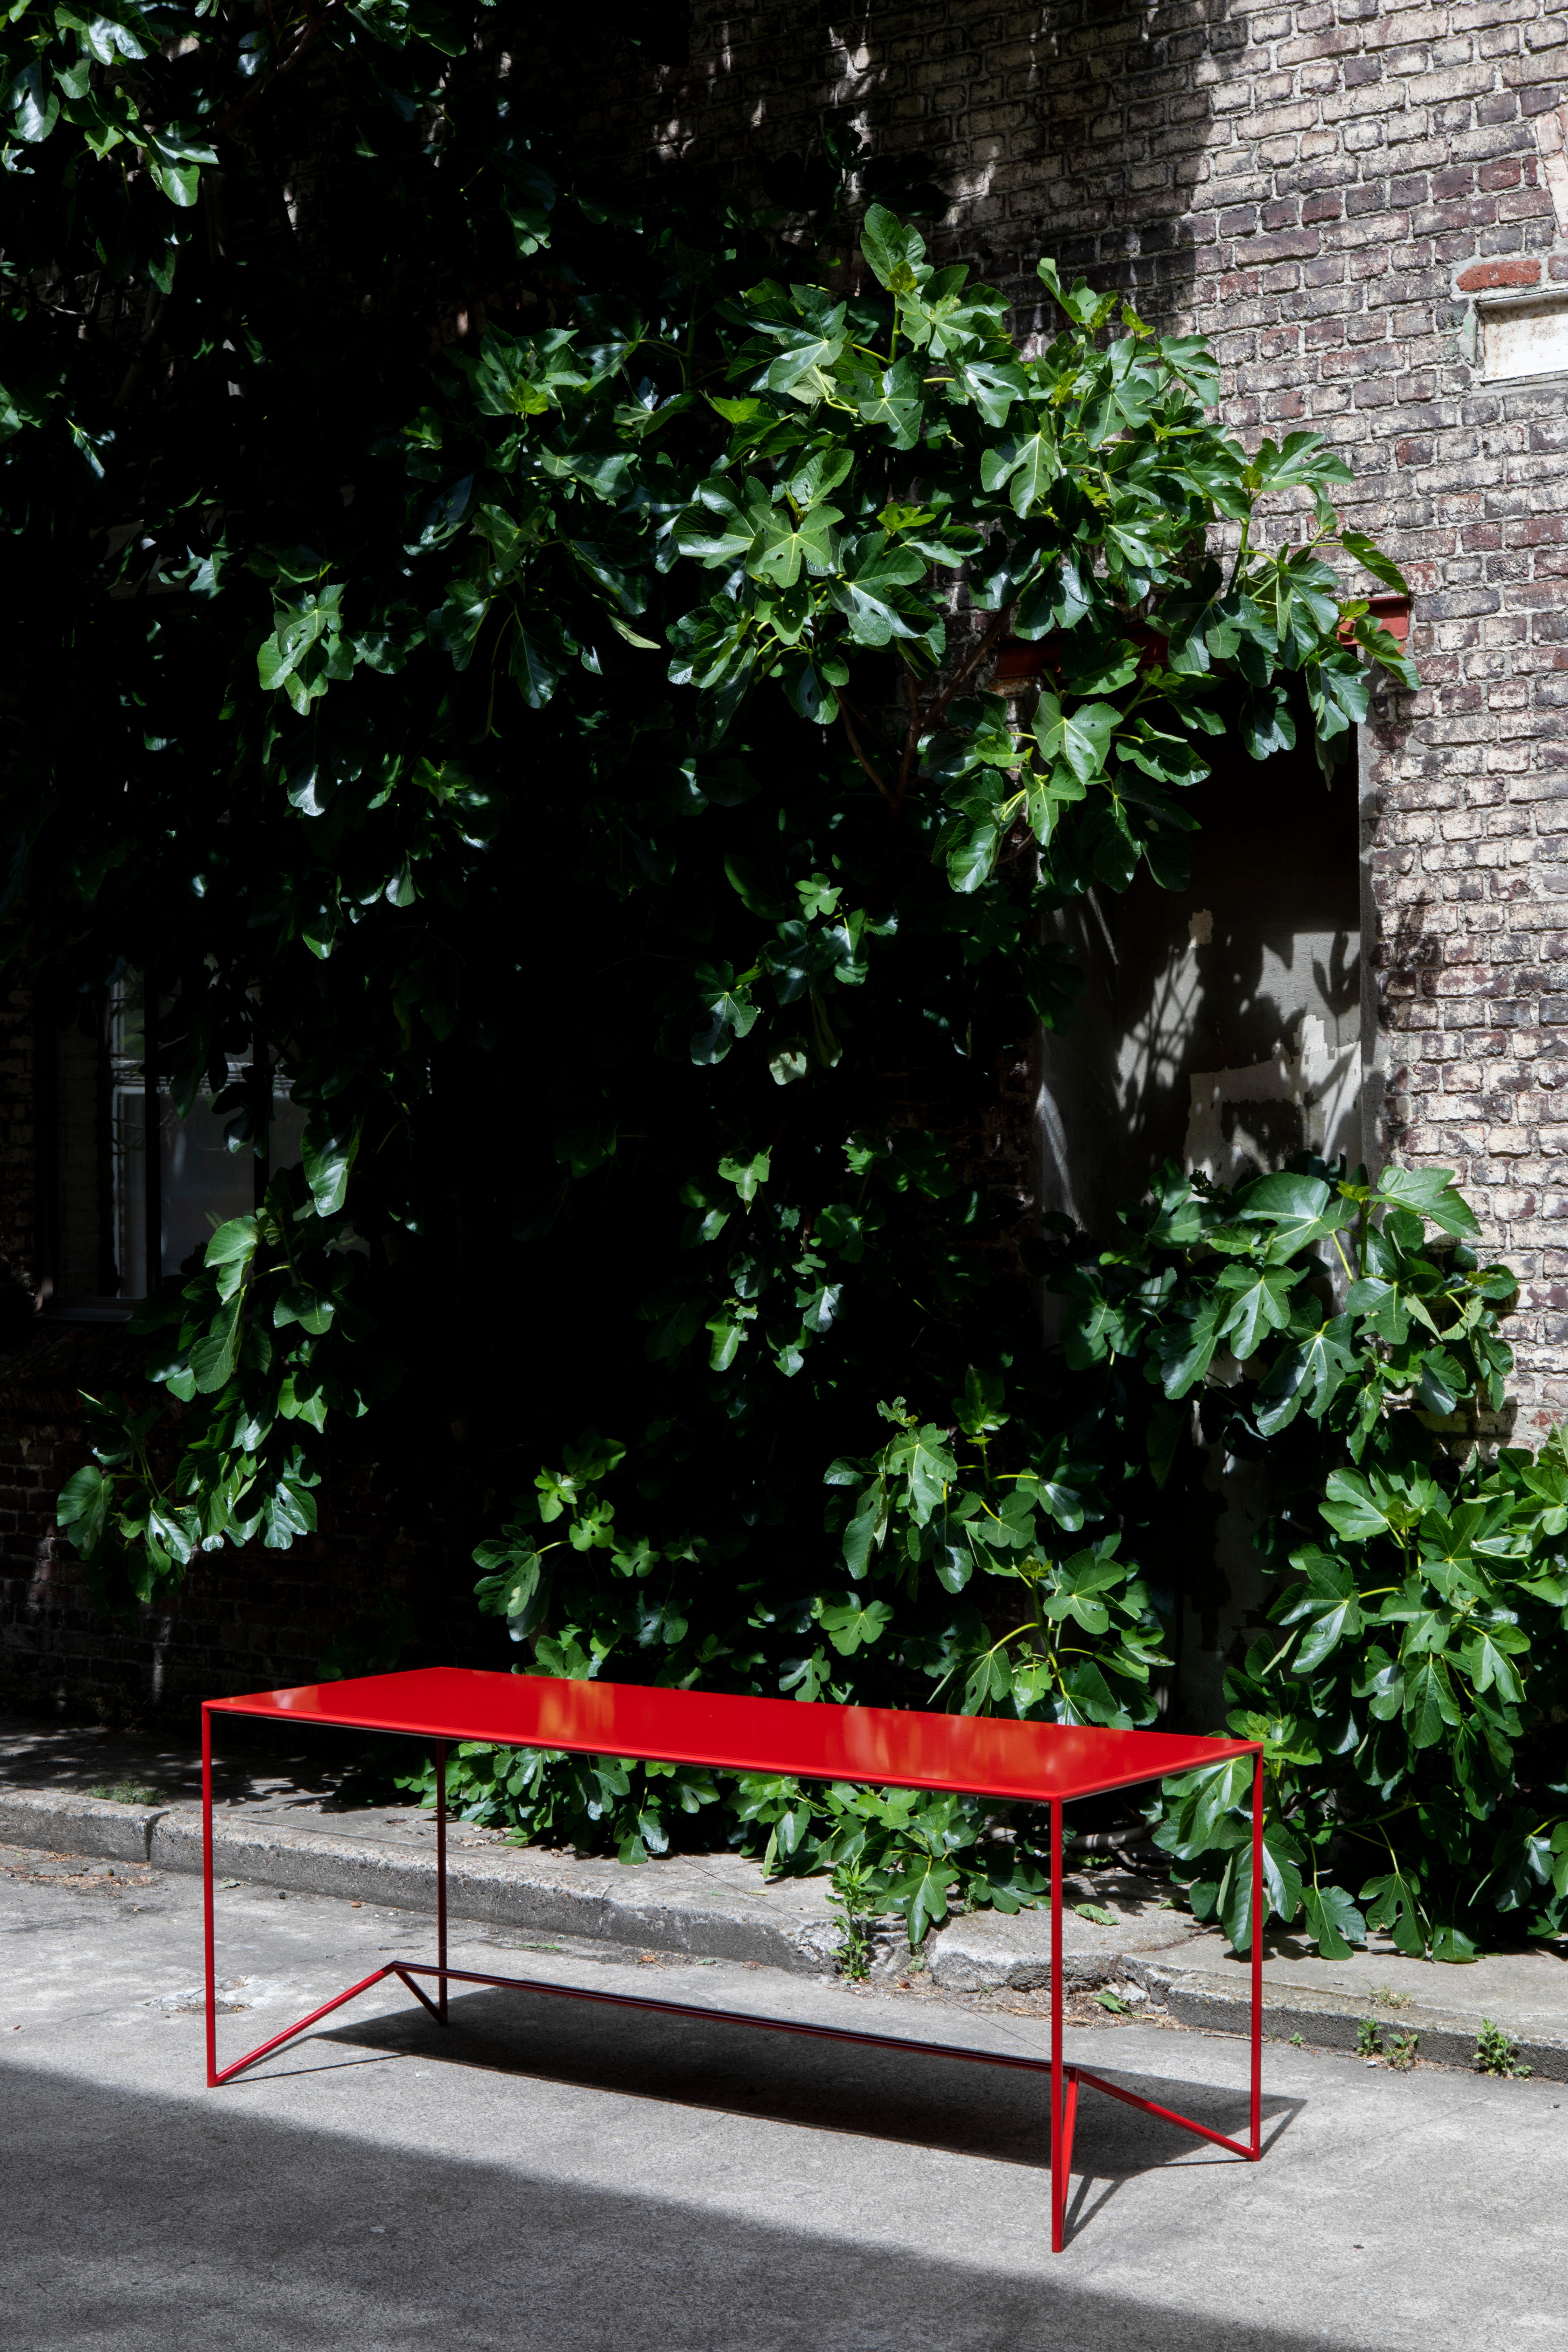 Campi Di Colore Red Table by Maria Scarpulla
Dimensions: D240 x W80 x H75 cm
Materials: Lacquered steel with a special coating for outdoor use.
Available in different colours: Color combination: red, yellow, blue, white. Please contact us.

A